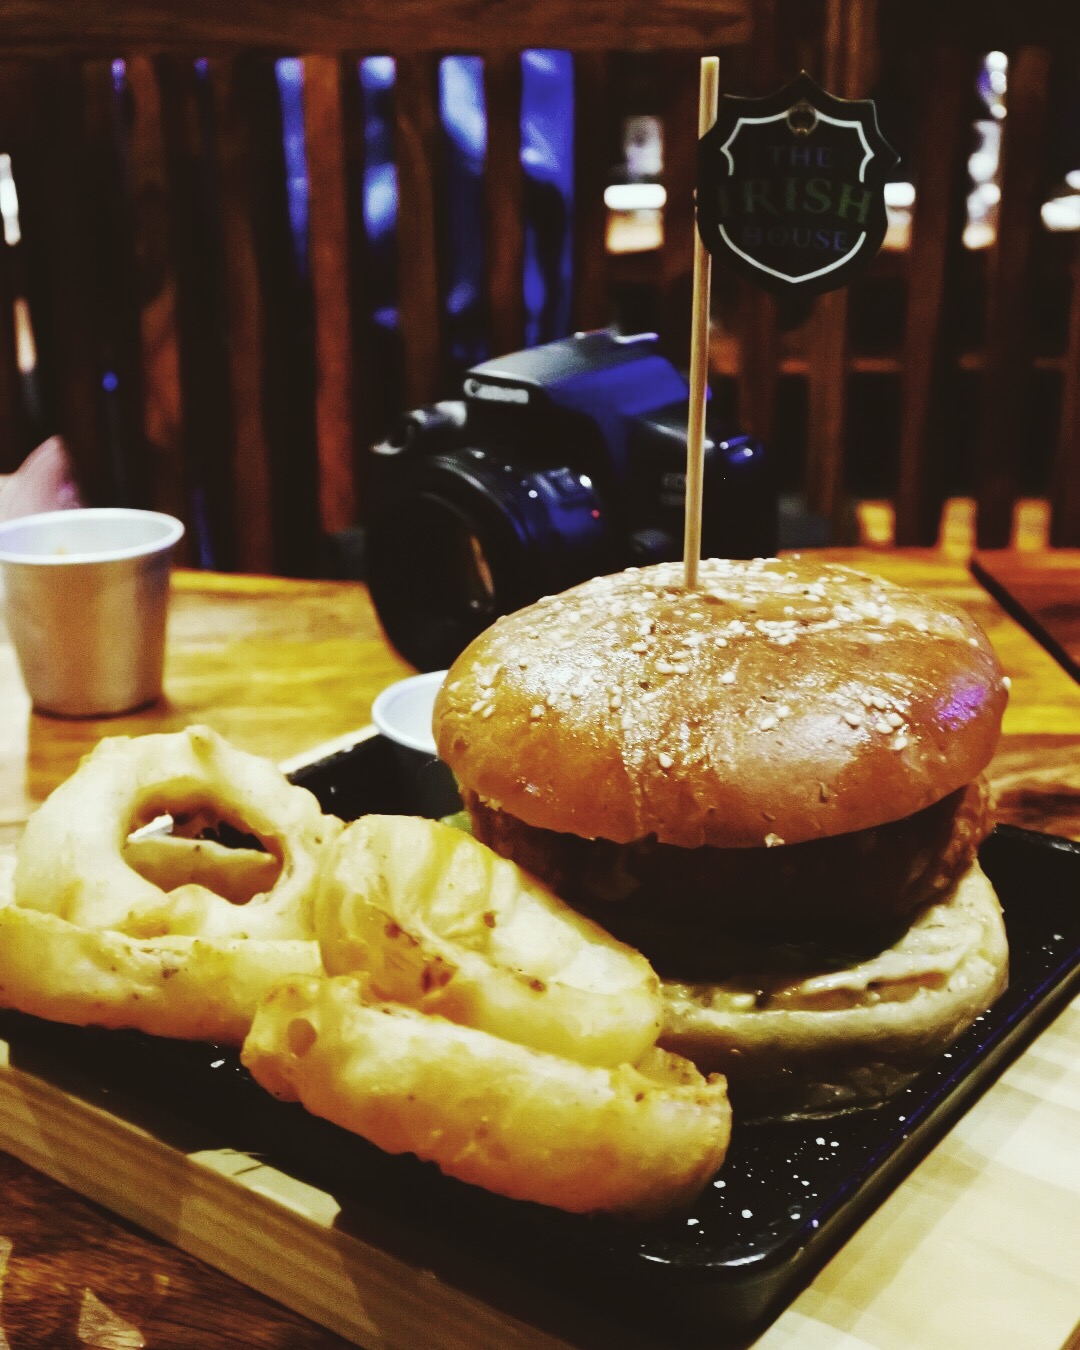 The burger accompanied by onion rings